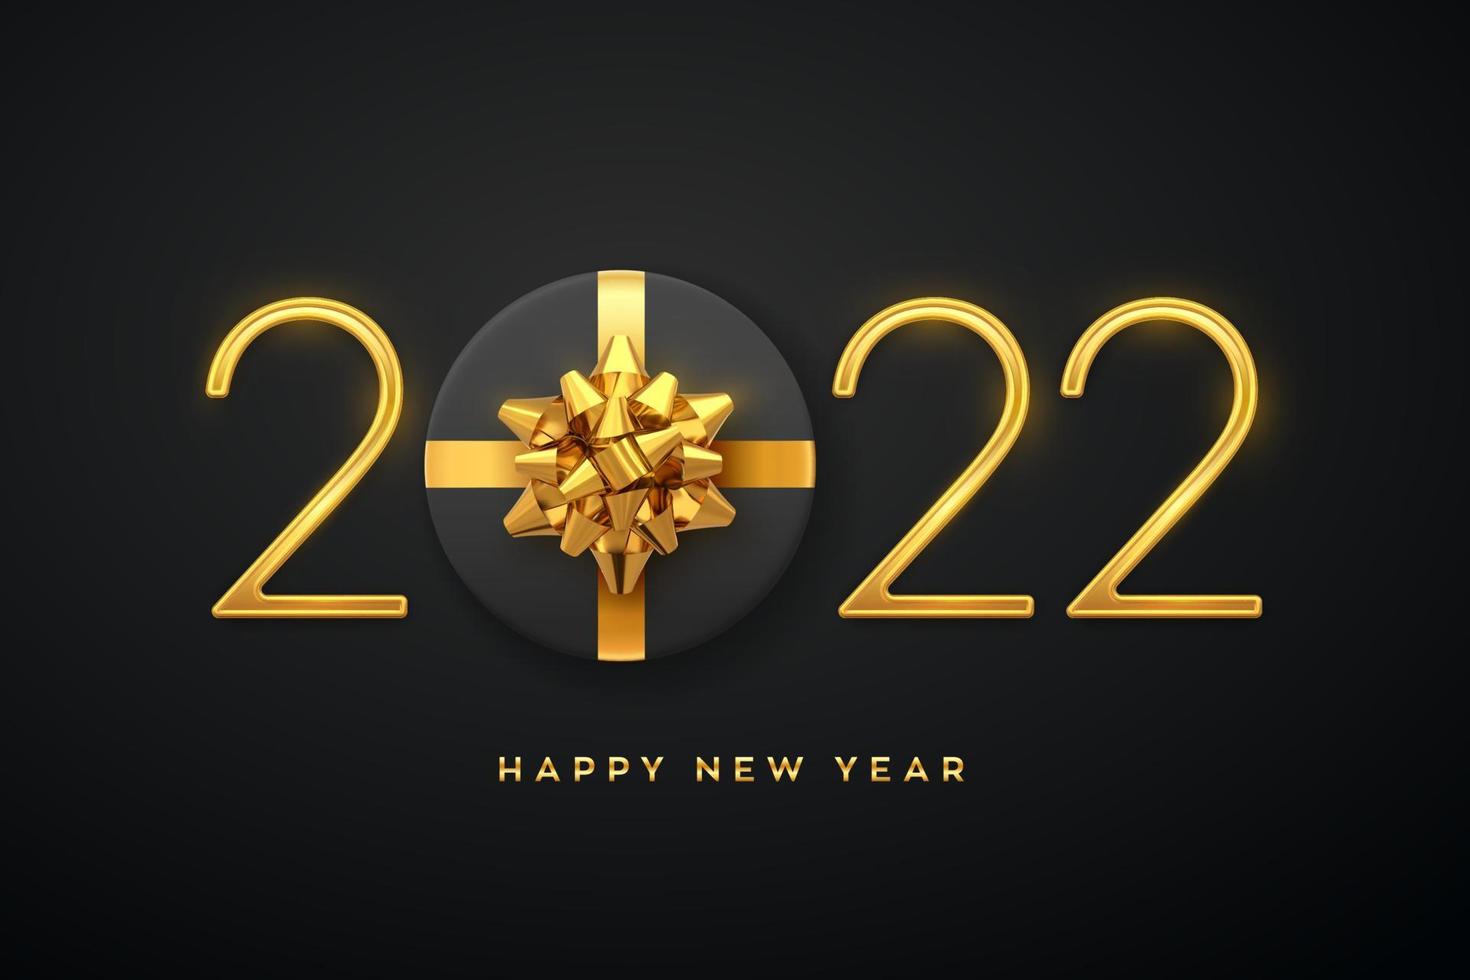 Happy New 2022 Year. Golden metallic luxury numbers 2022 with gift box with golden bow on black background. Realistic sign for greeting card. Festive poster or holiday banner. Vector illustration.